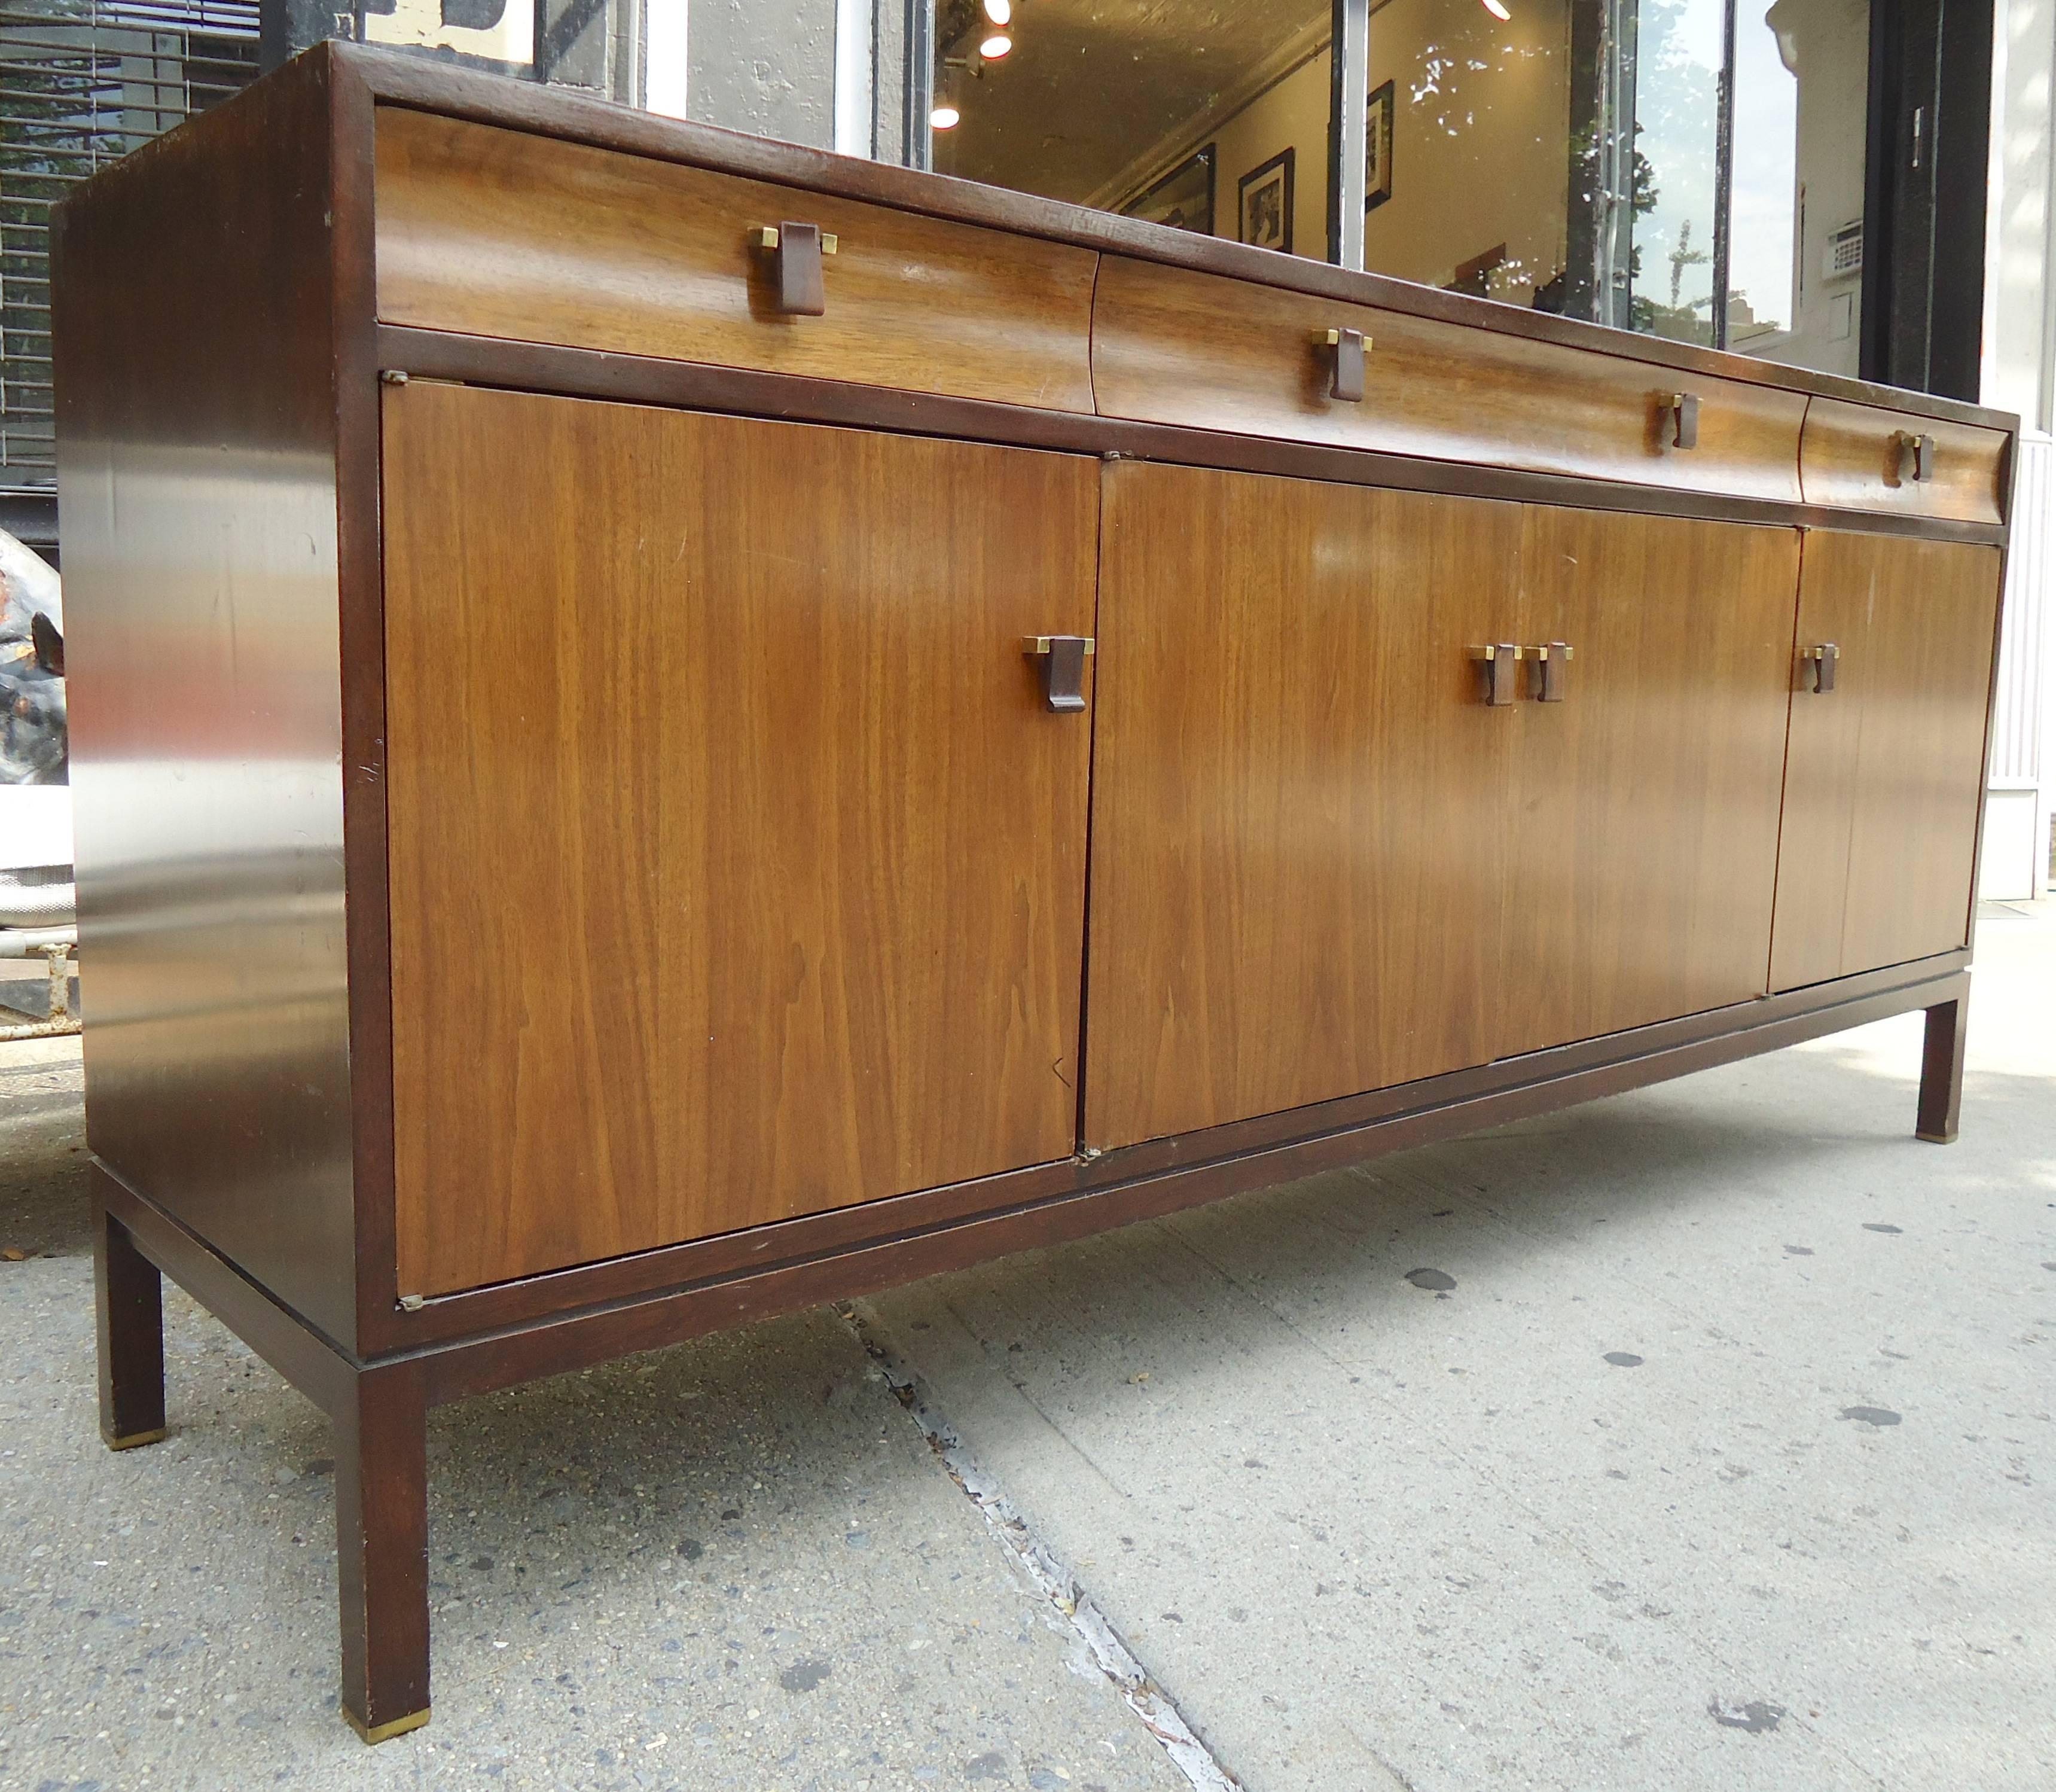 Mid-Century Modern two-tone sideboard by Dunbar. Featuring dark espresso finish frame, walnut grain an rosewood handles, accented by brass hardware.

(Please confirm item location - NY or NJ - with dealer).
  